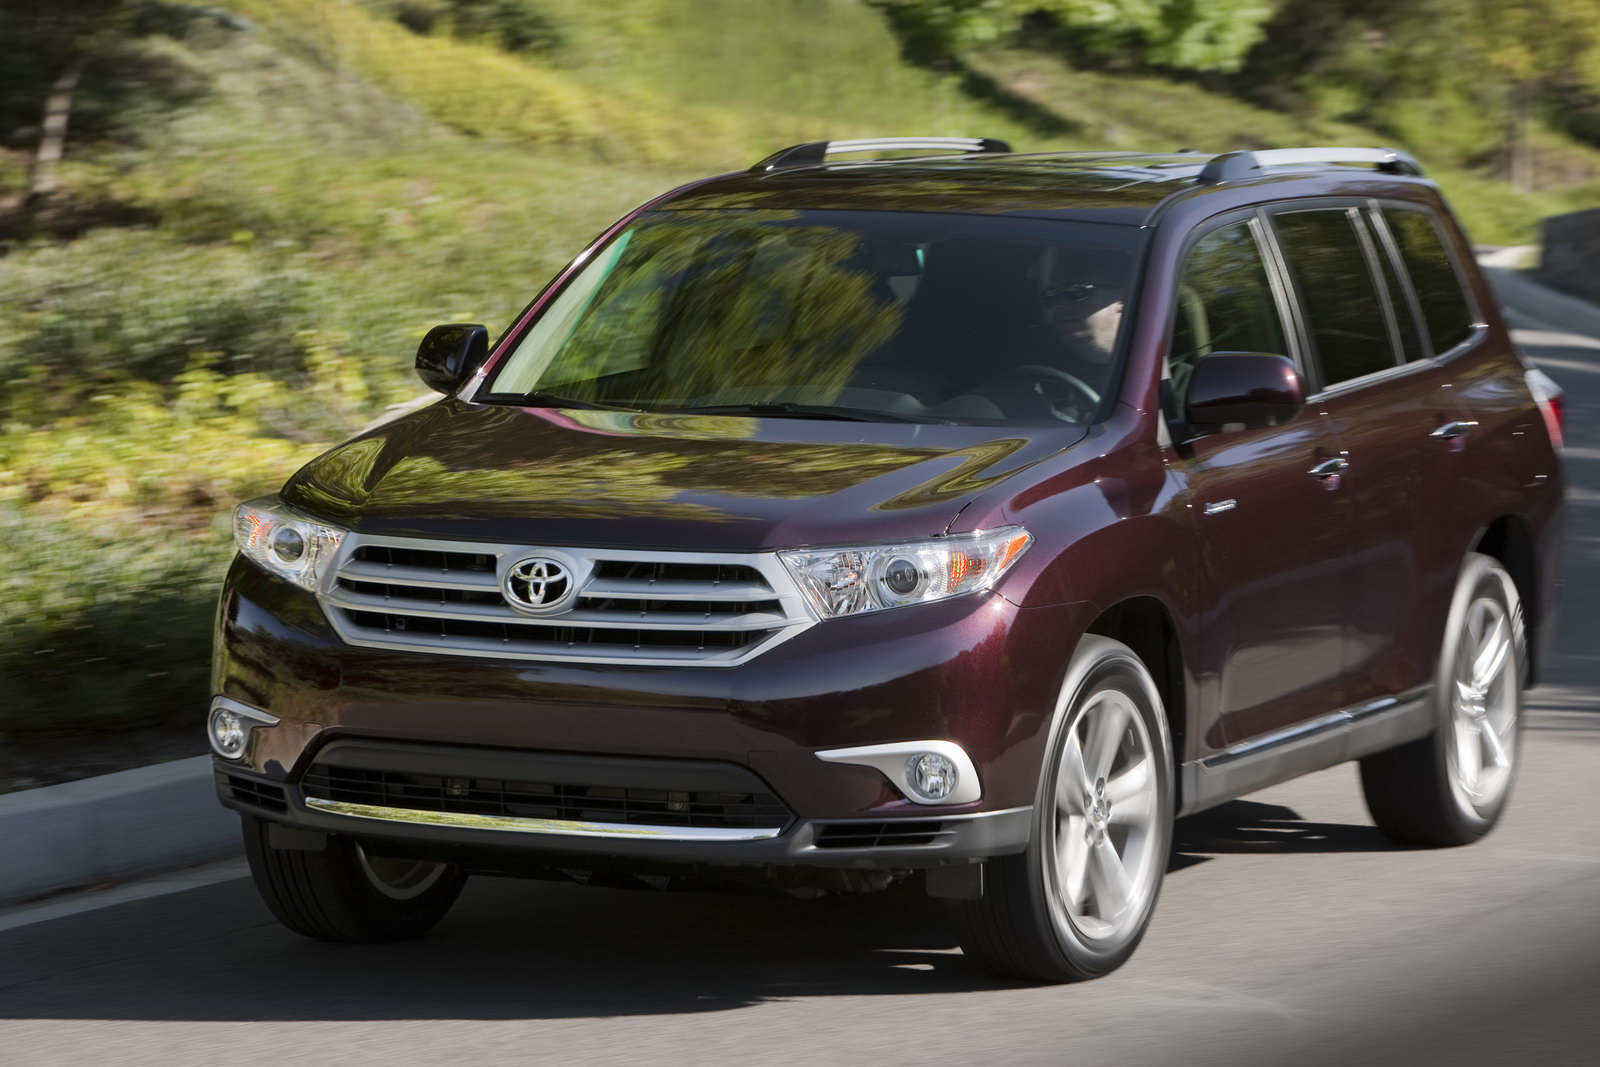 2011 Toyota Highlander Official Review |NEW CAR|USED CAR REVIEWS PICTURE